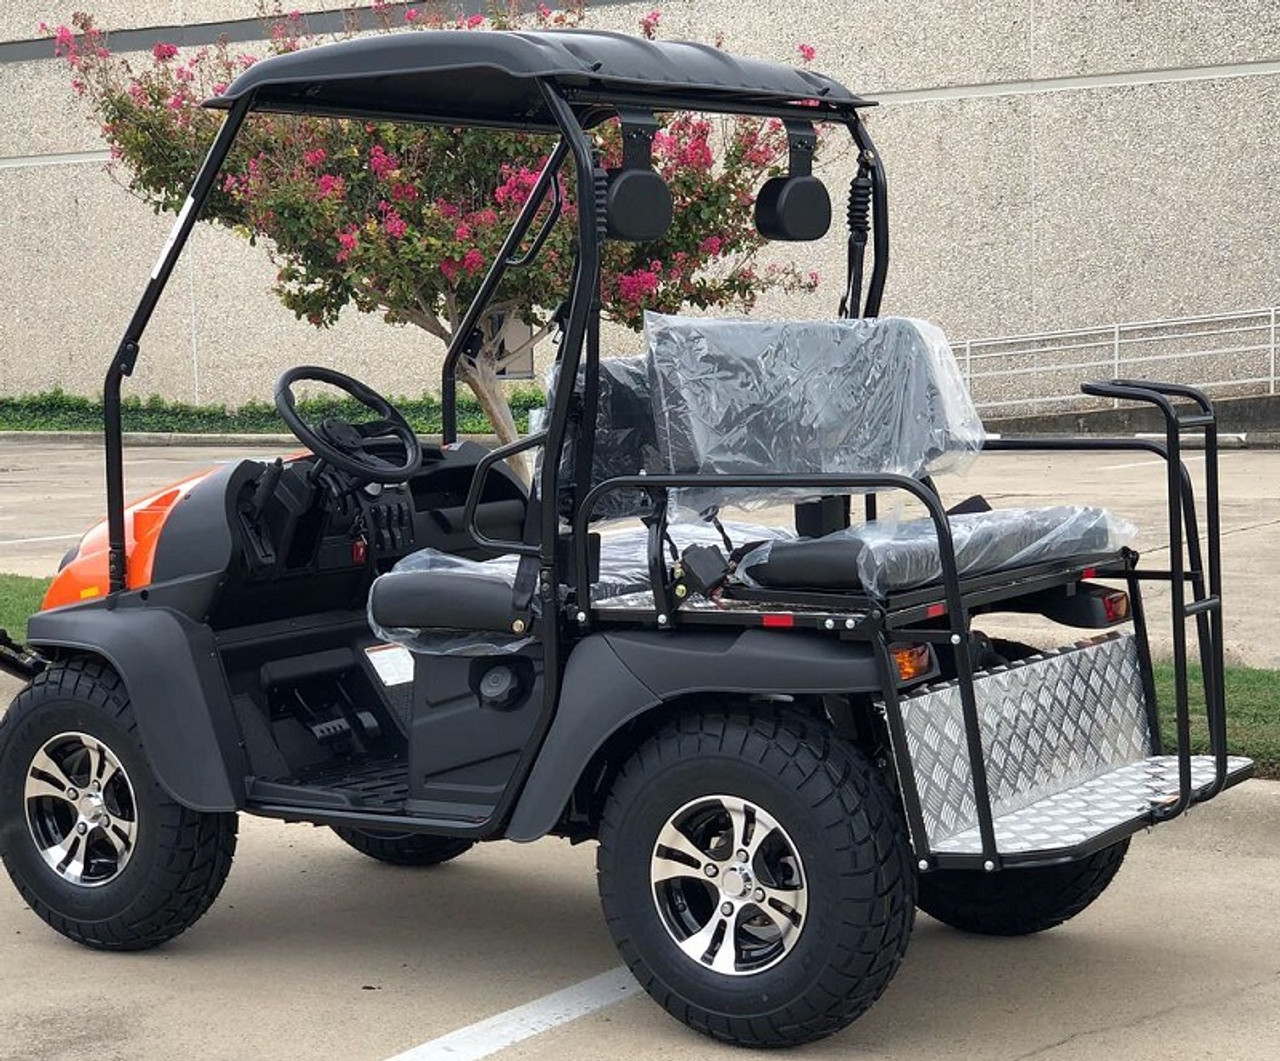 Orange- Fully Loaded Cazador OUTFITTER 200 Golf Cart 4 Seater Street Legal UTV - Fully Assembled and Tested